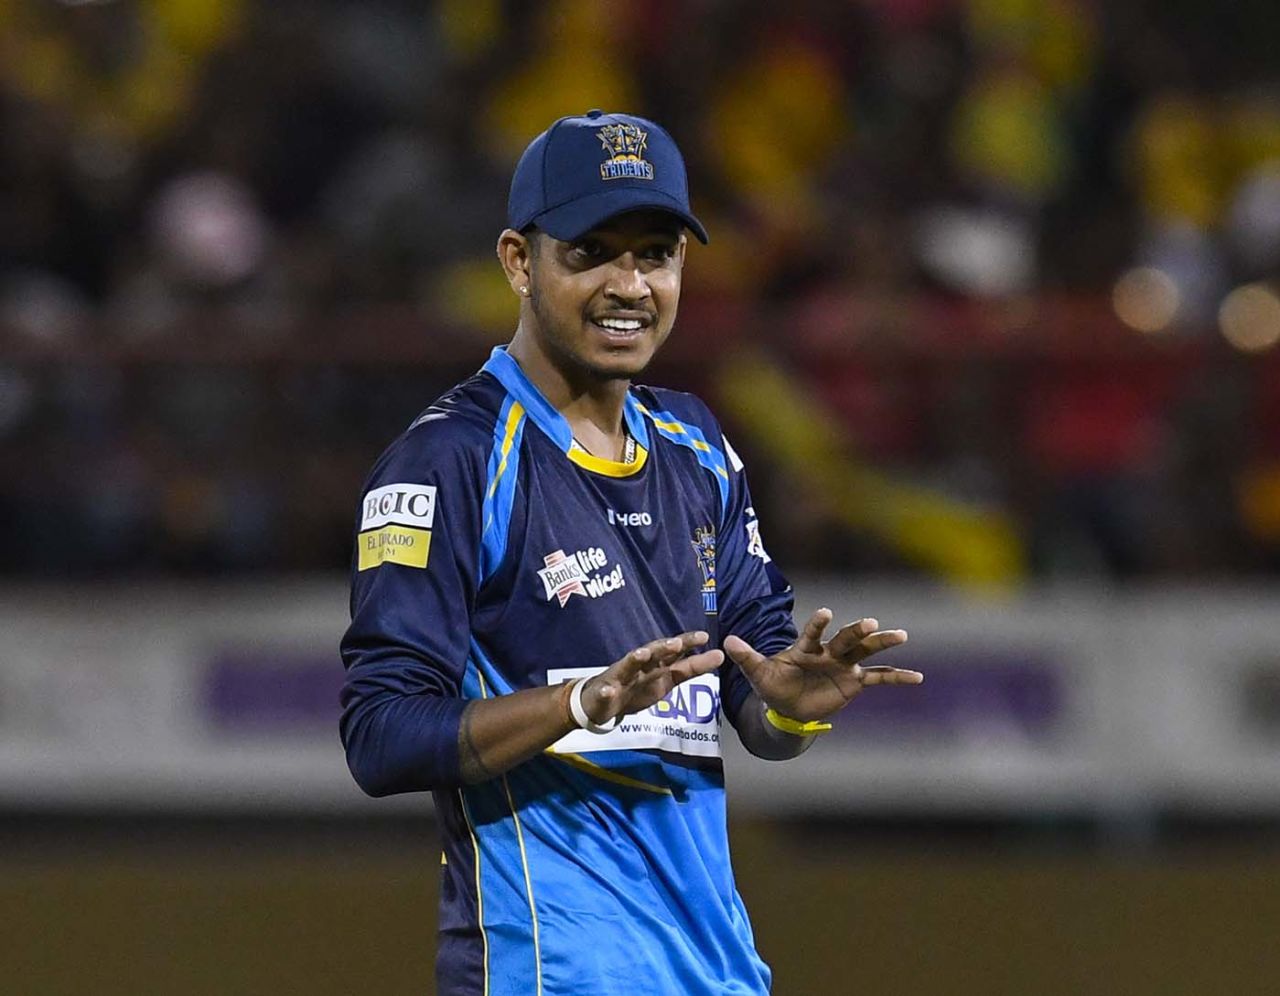 Sandeep Lamichhane reacts in the field, Guyana Amazon Warriors v Barbados Tridents, CPL 2019, Providence, September 8, 2019